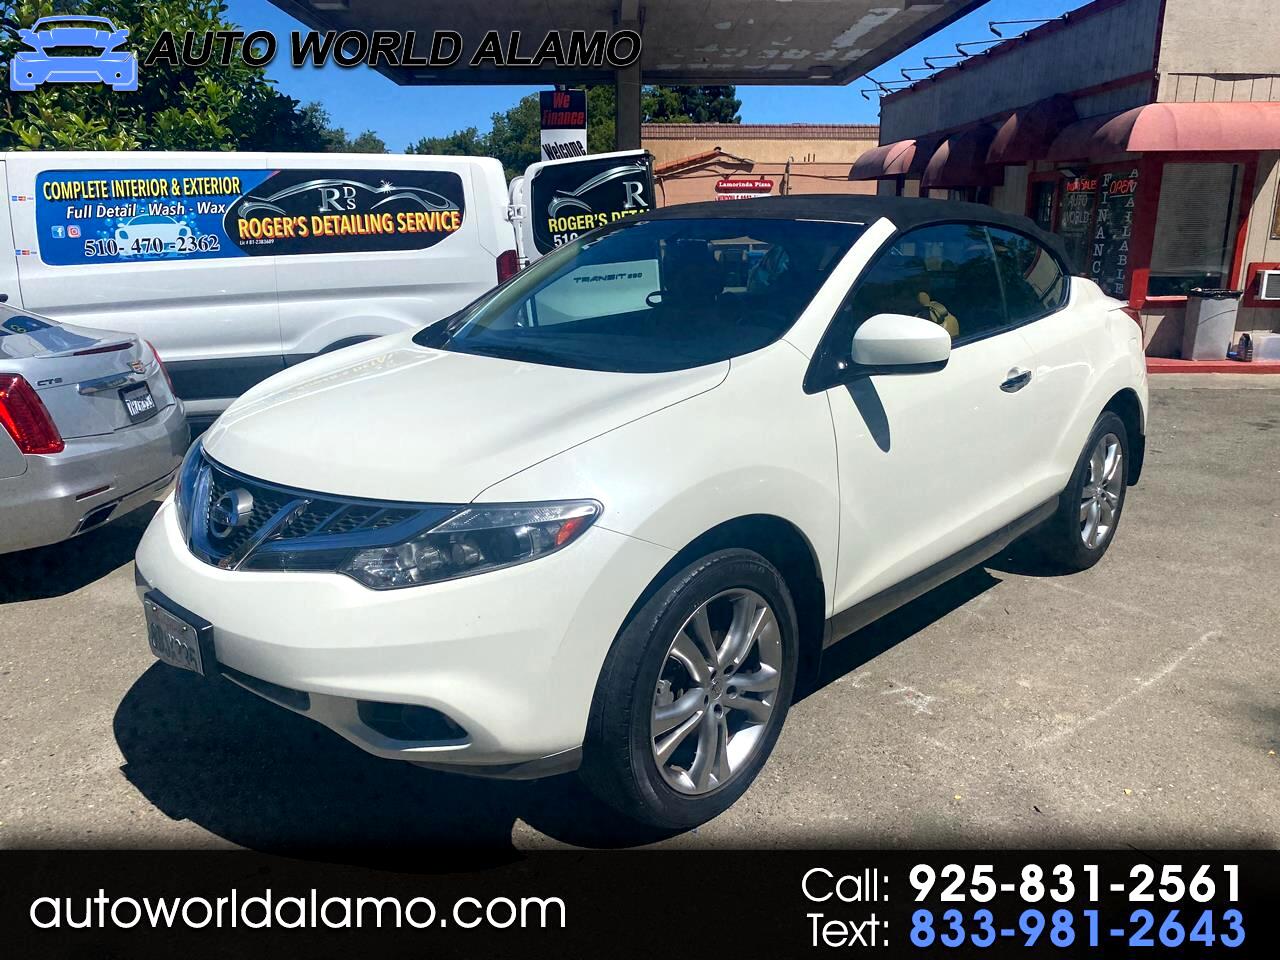 Nissan Murano CrossCabriolet AWD 2dr Convertible 2011